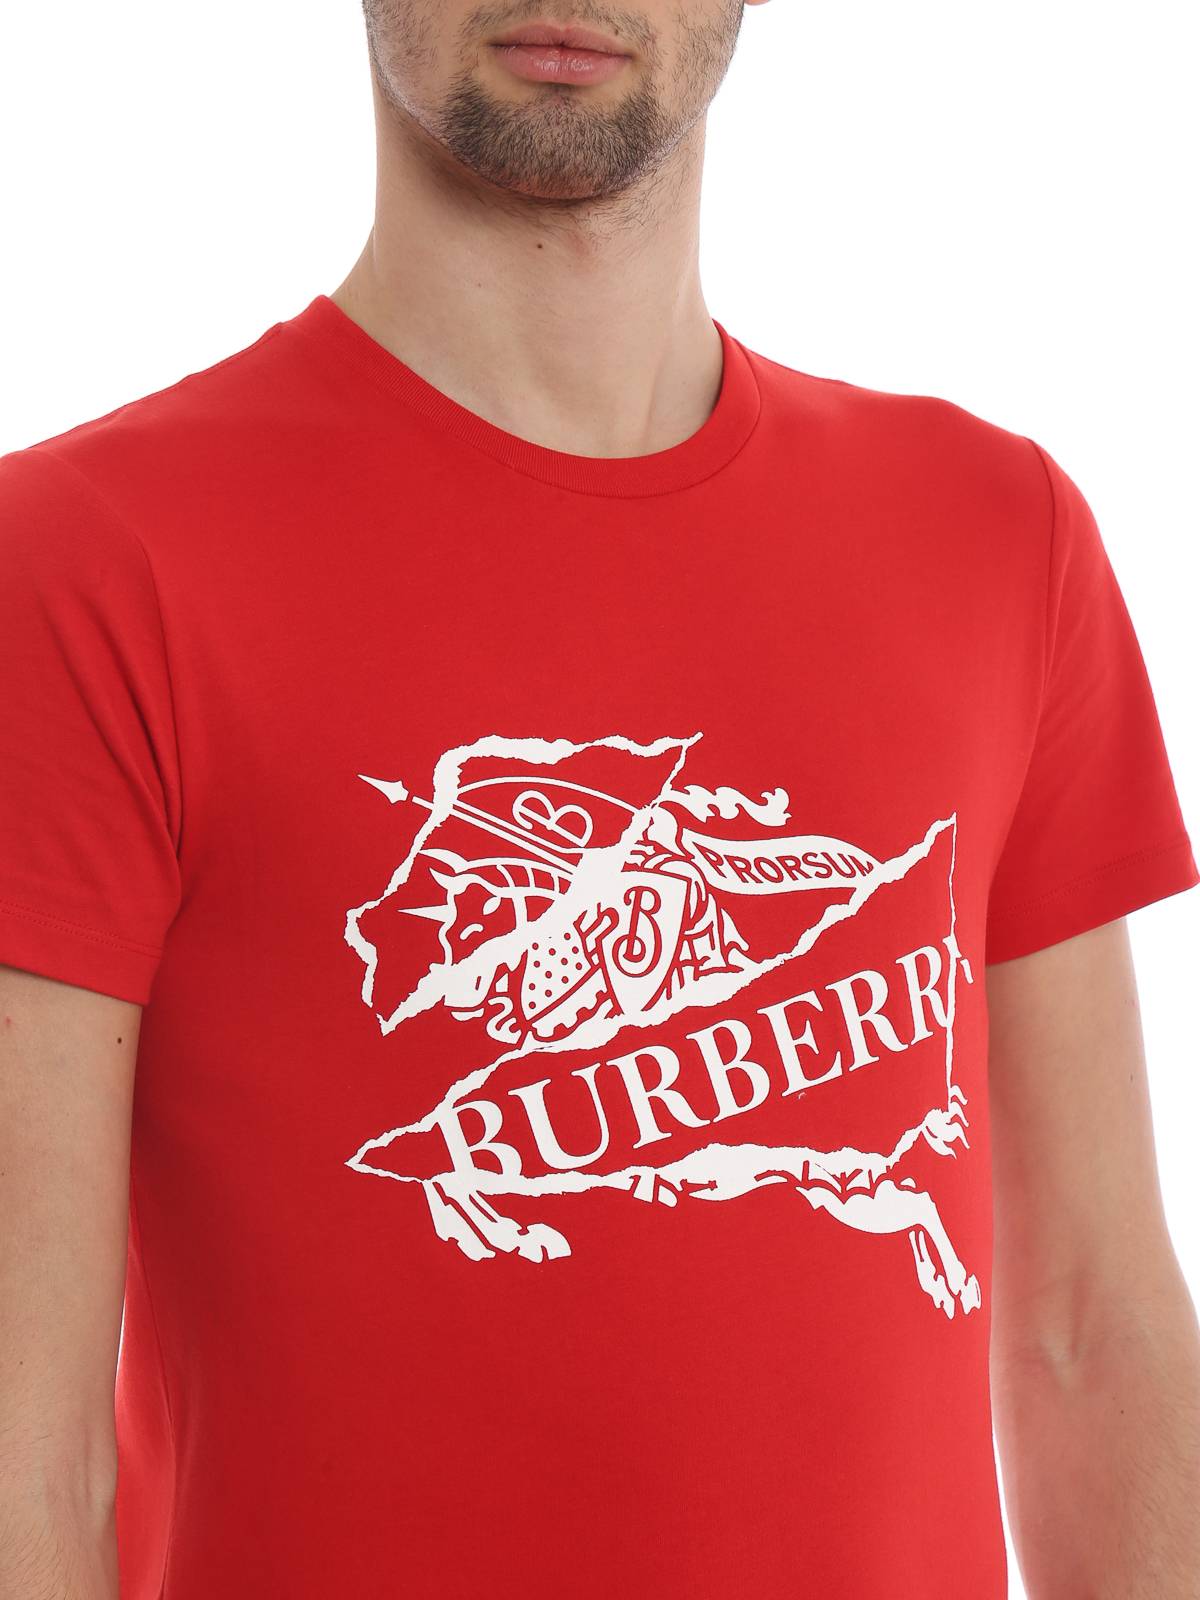 buy red t shirt online